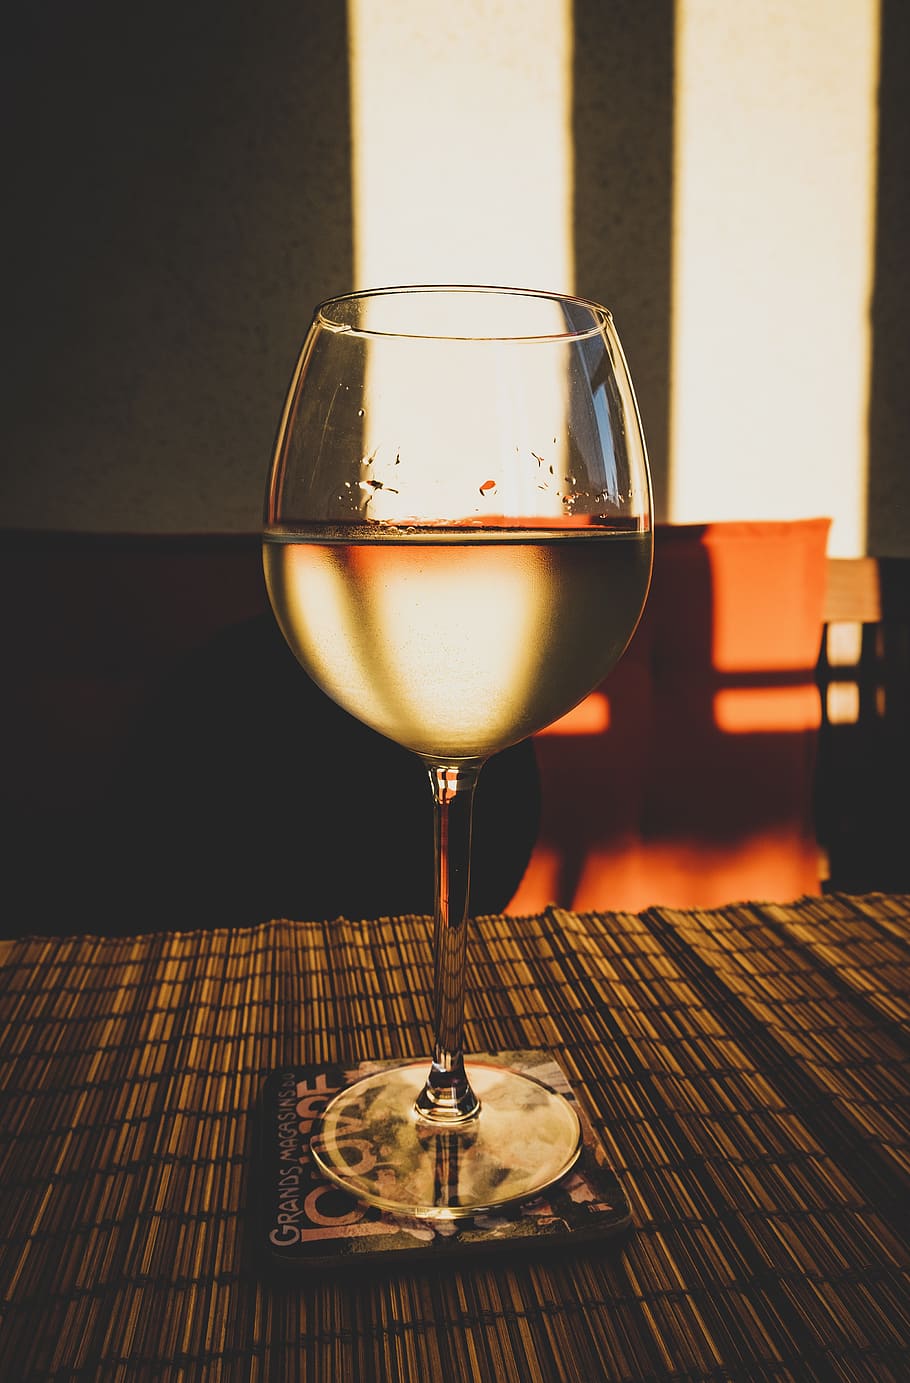 glass, wine, white wine, glass of wine, drink, sunset, alcohol, balcony, table, still life